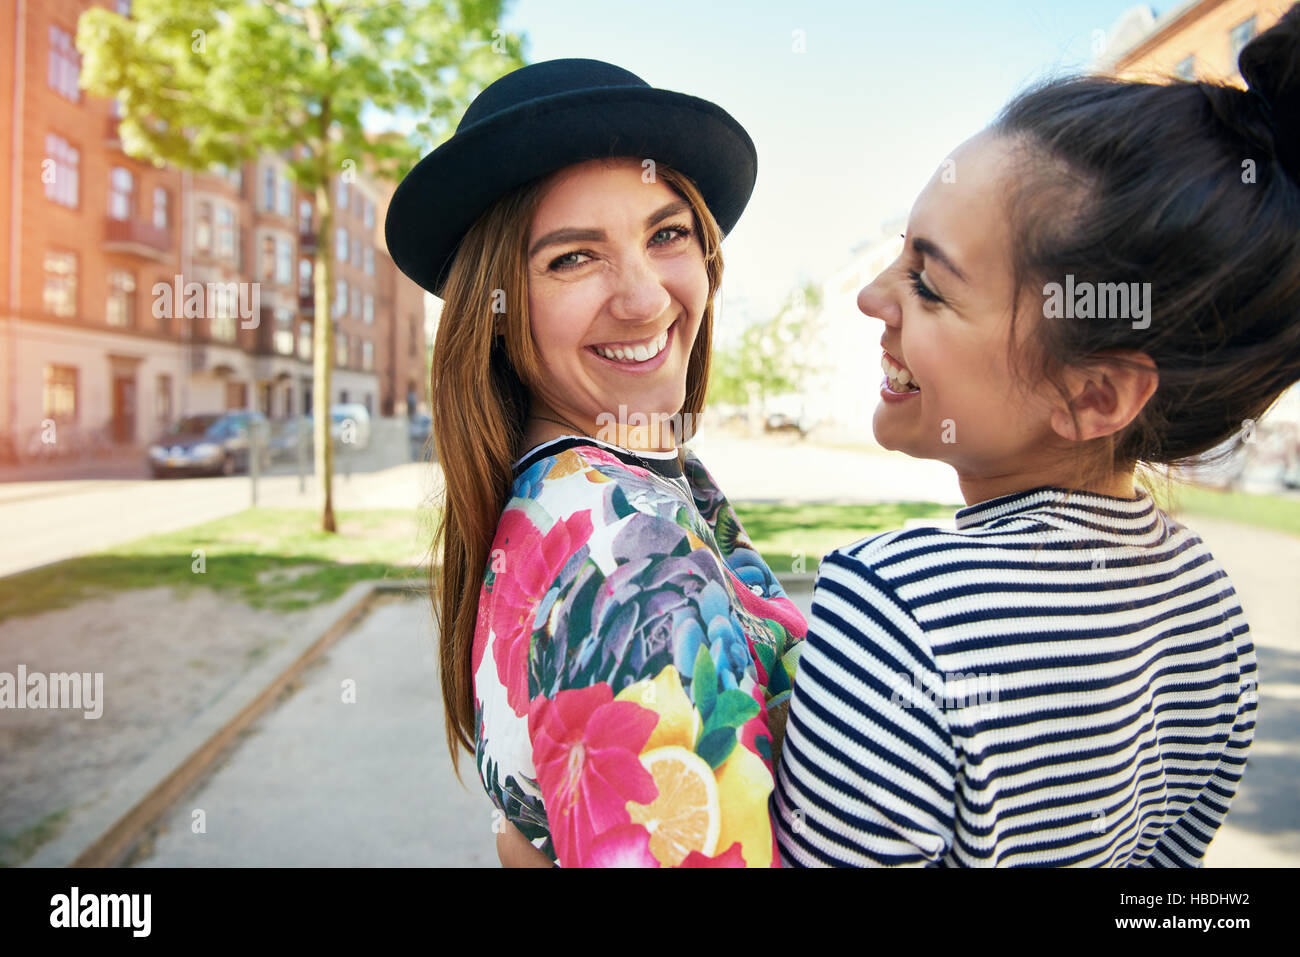 Trendy young woman with a lovely smile wearing a chic little hat standing together with a friend turning to look at the camera in an urban setting Stock Photo